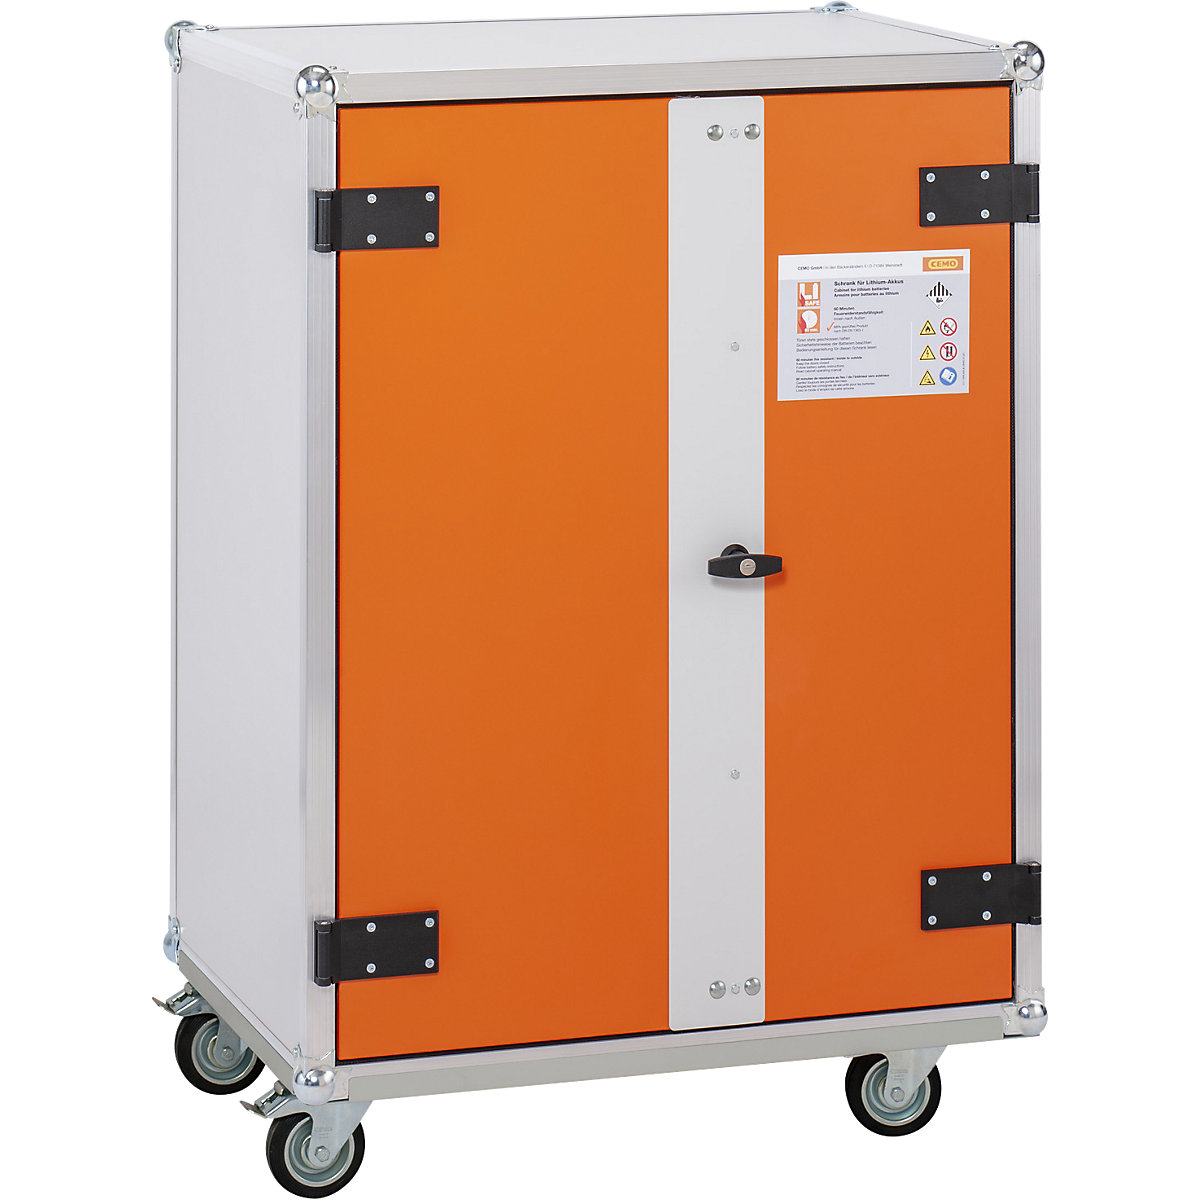 BASIC safety battery charging cabinet – CEMO, with castors, height 1150 mm, 400 V, orange/grey-1